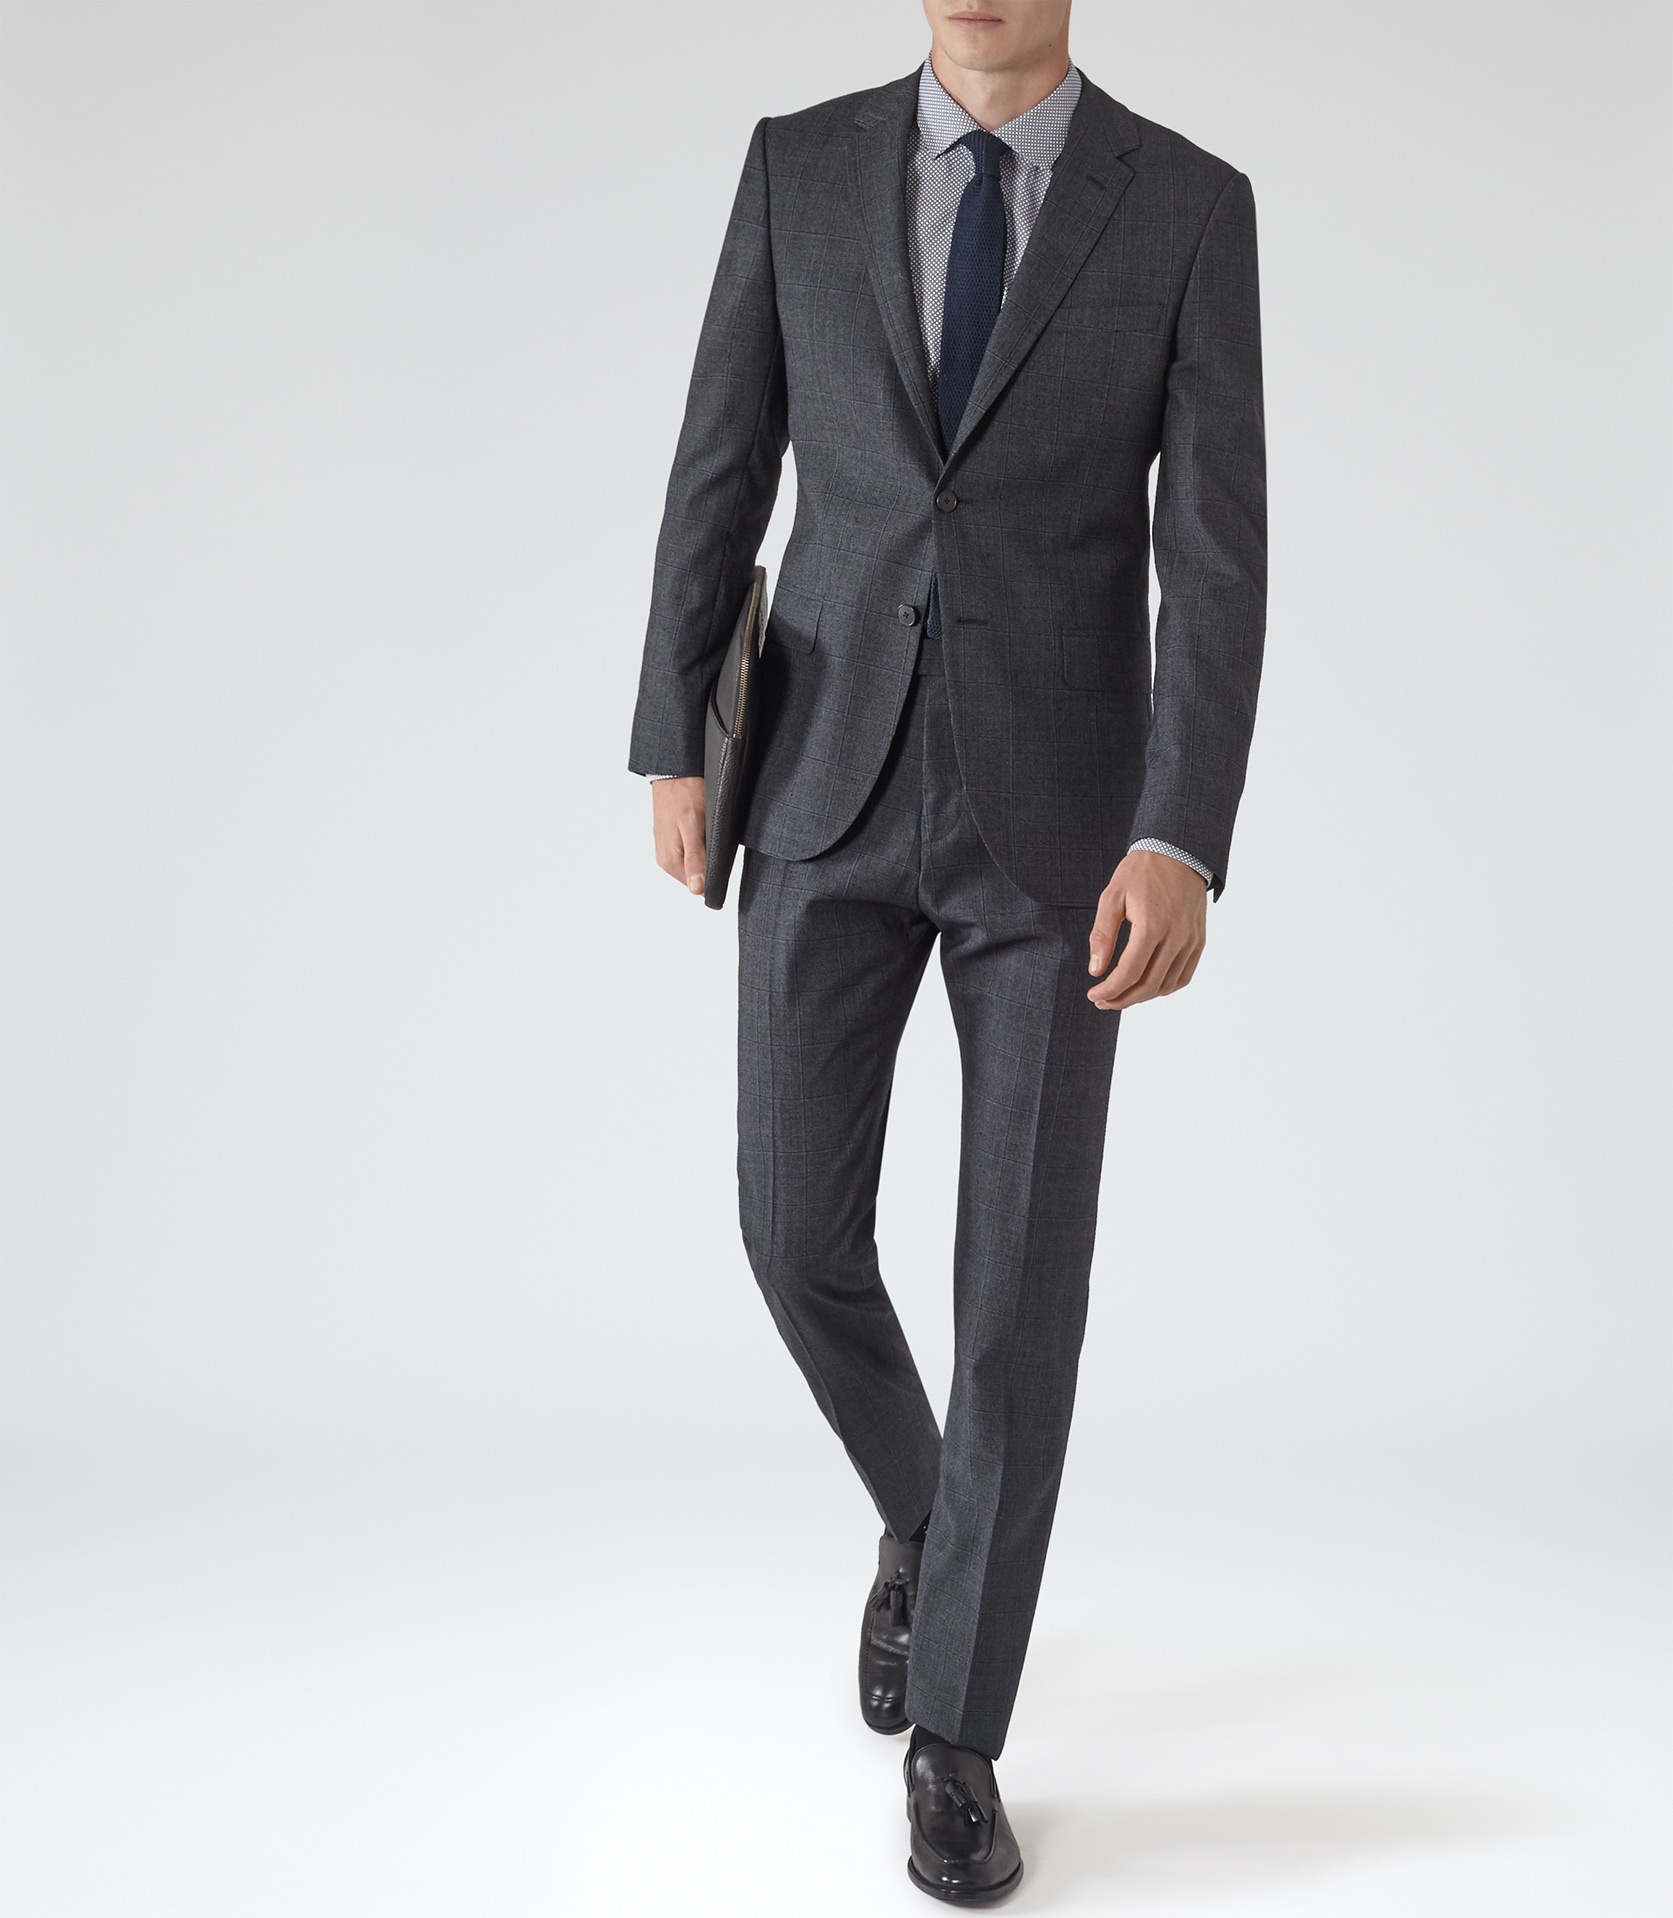 Lyst - Reiss Archer Checked Modern Suit in Blue for Men